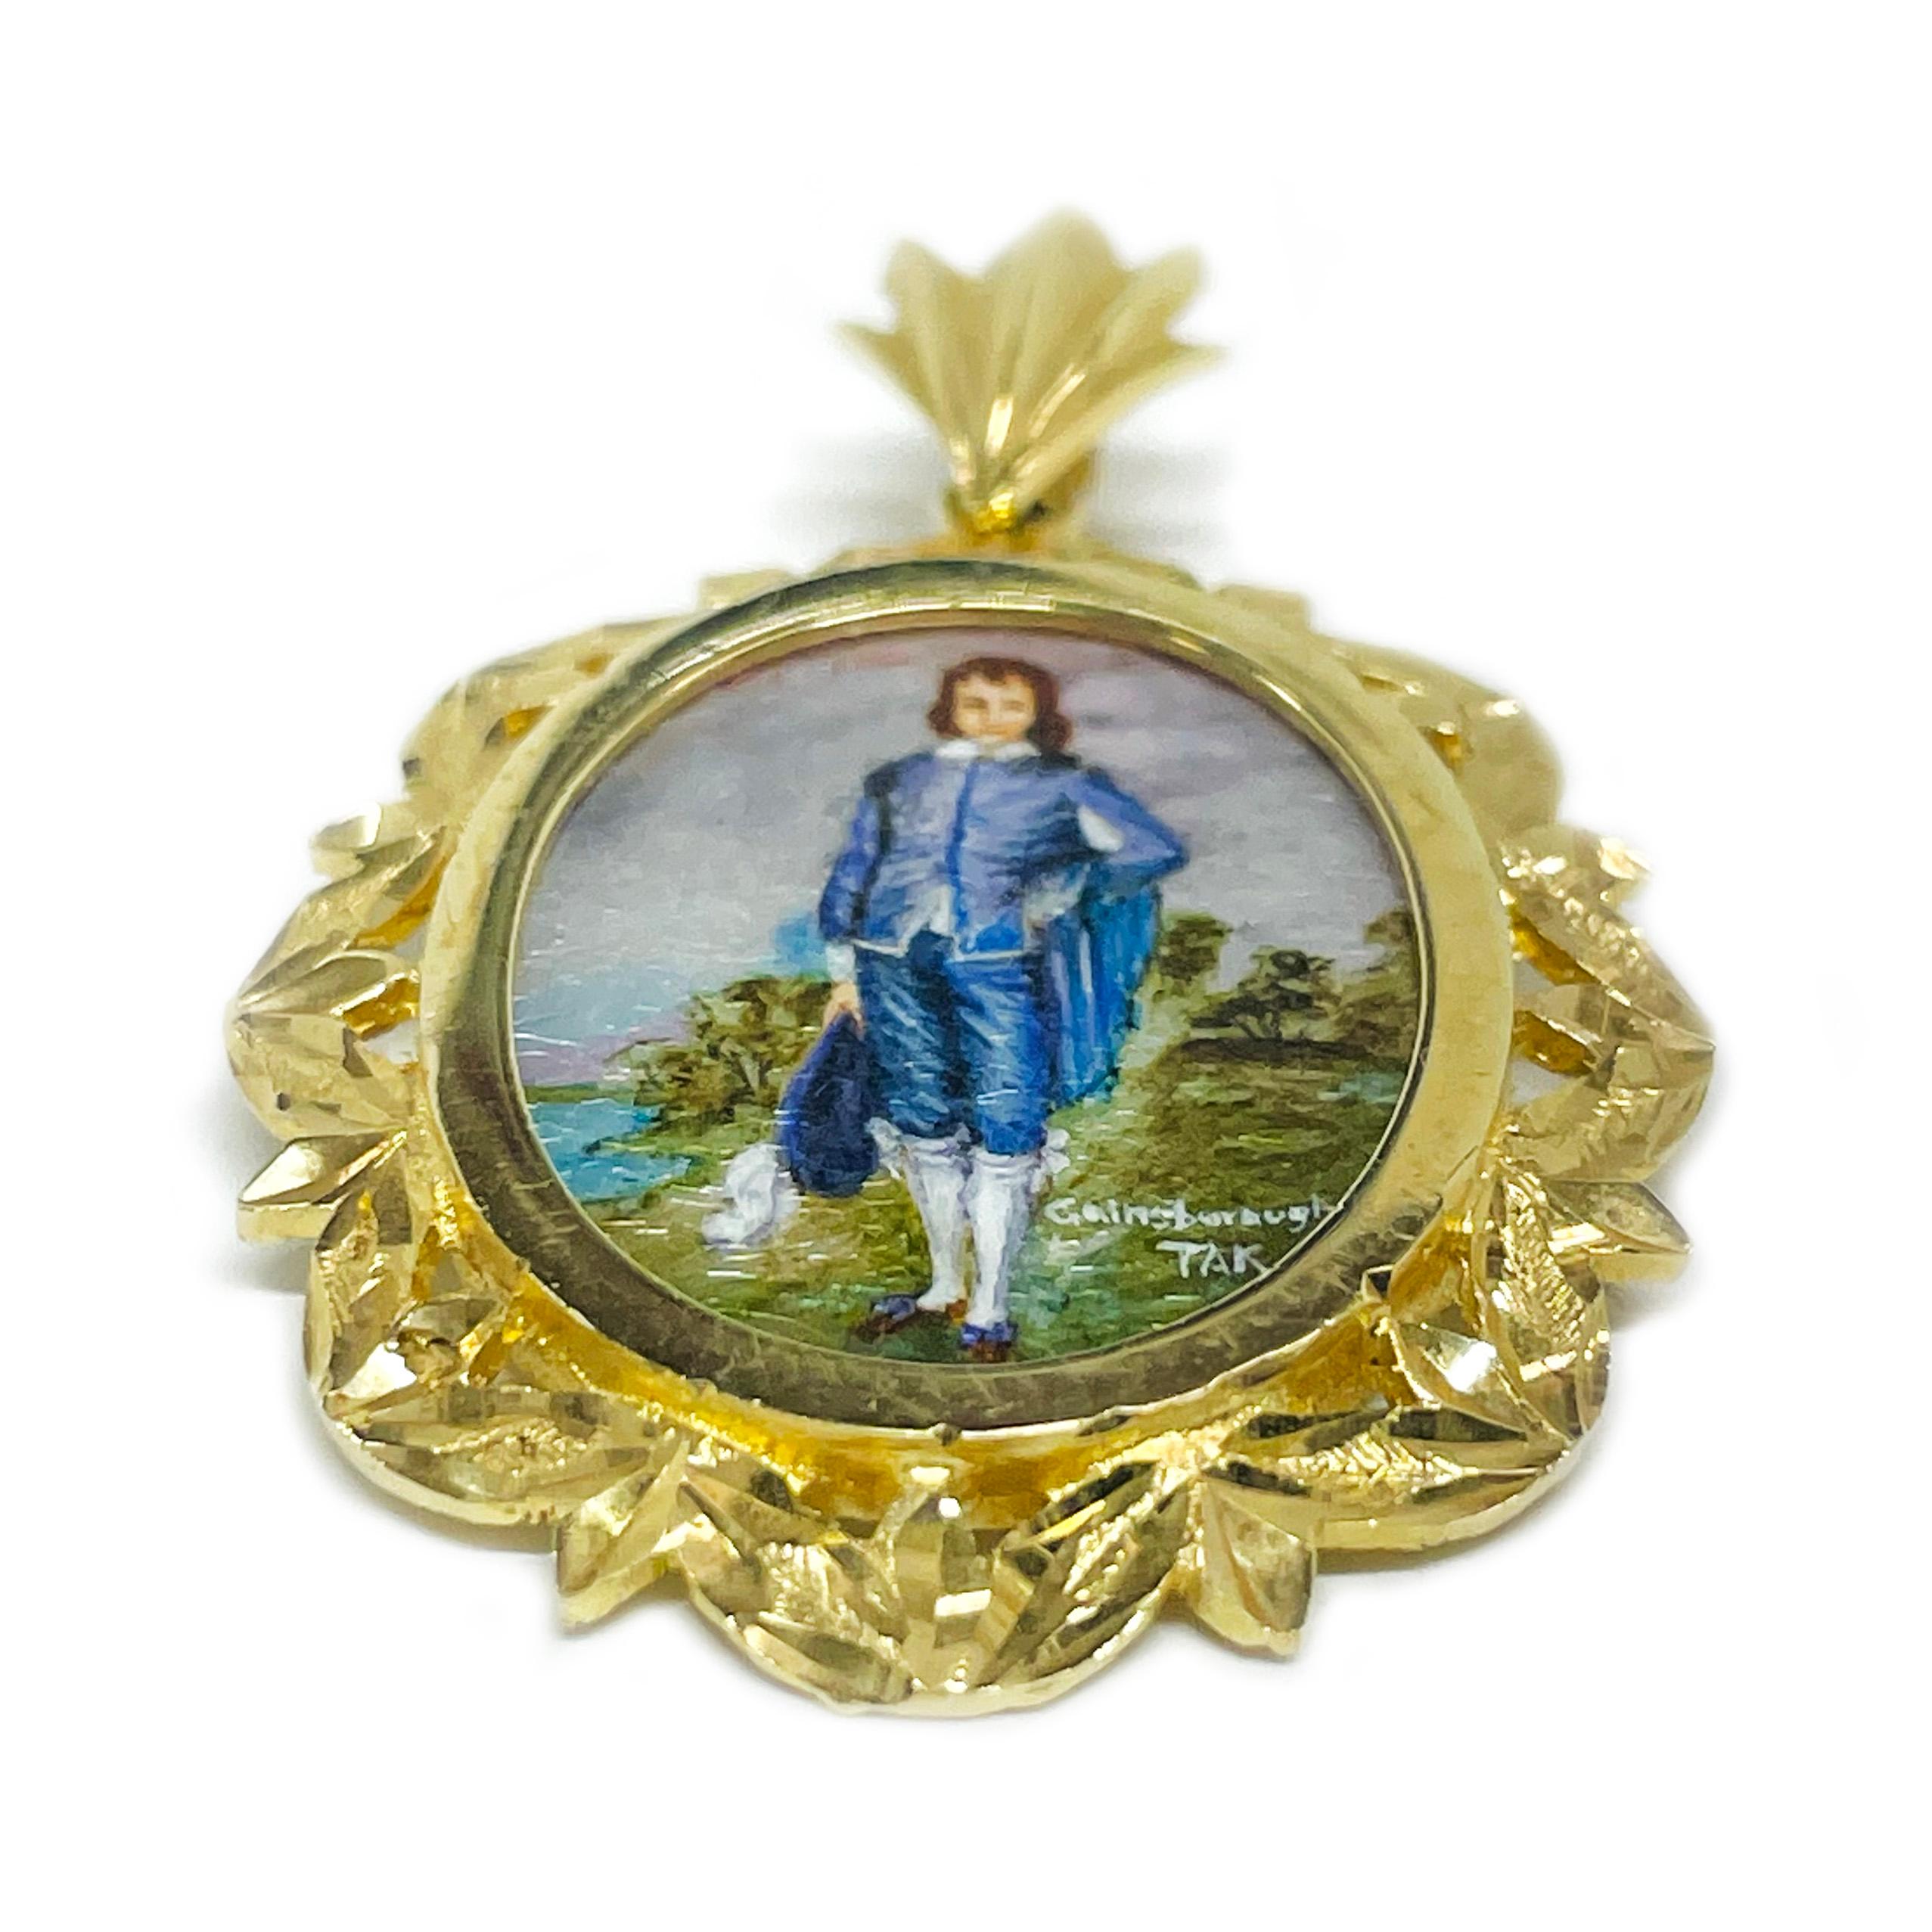 14 Karat Yellow Gold 'Blue Boy' Hand Painted Mother of Pearl Pendant. Absolutely lovely recreated Thomas Gainsborough's 'Blue Boy' painting. The miniature painting is set in a 14 karat gold ornate oval frame with diamond-cut details. The painting is